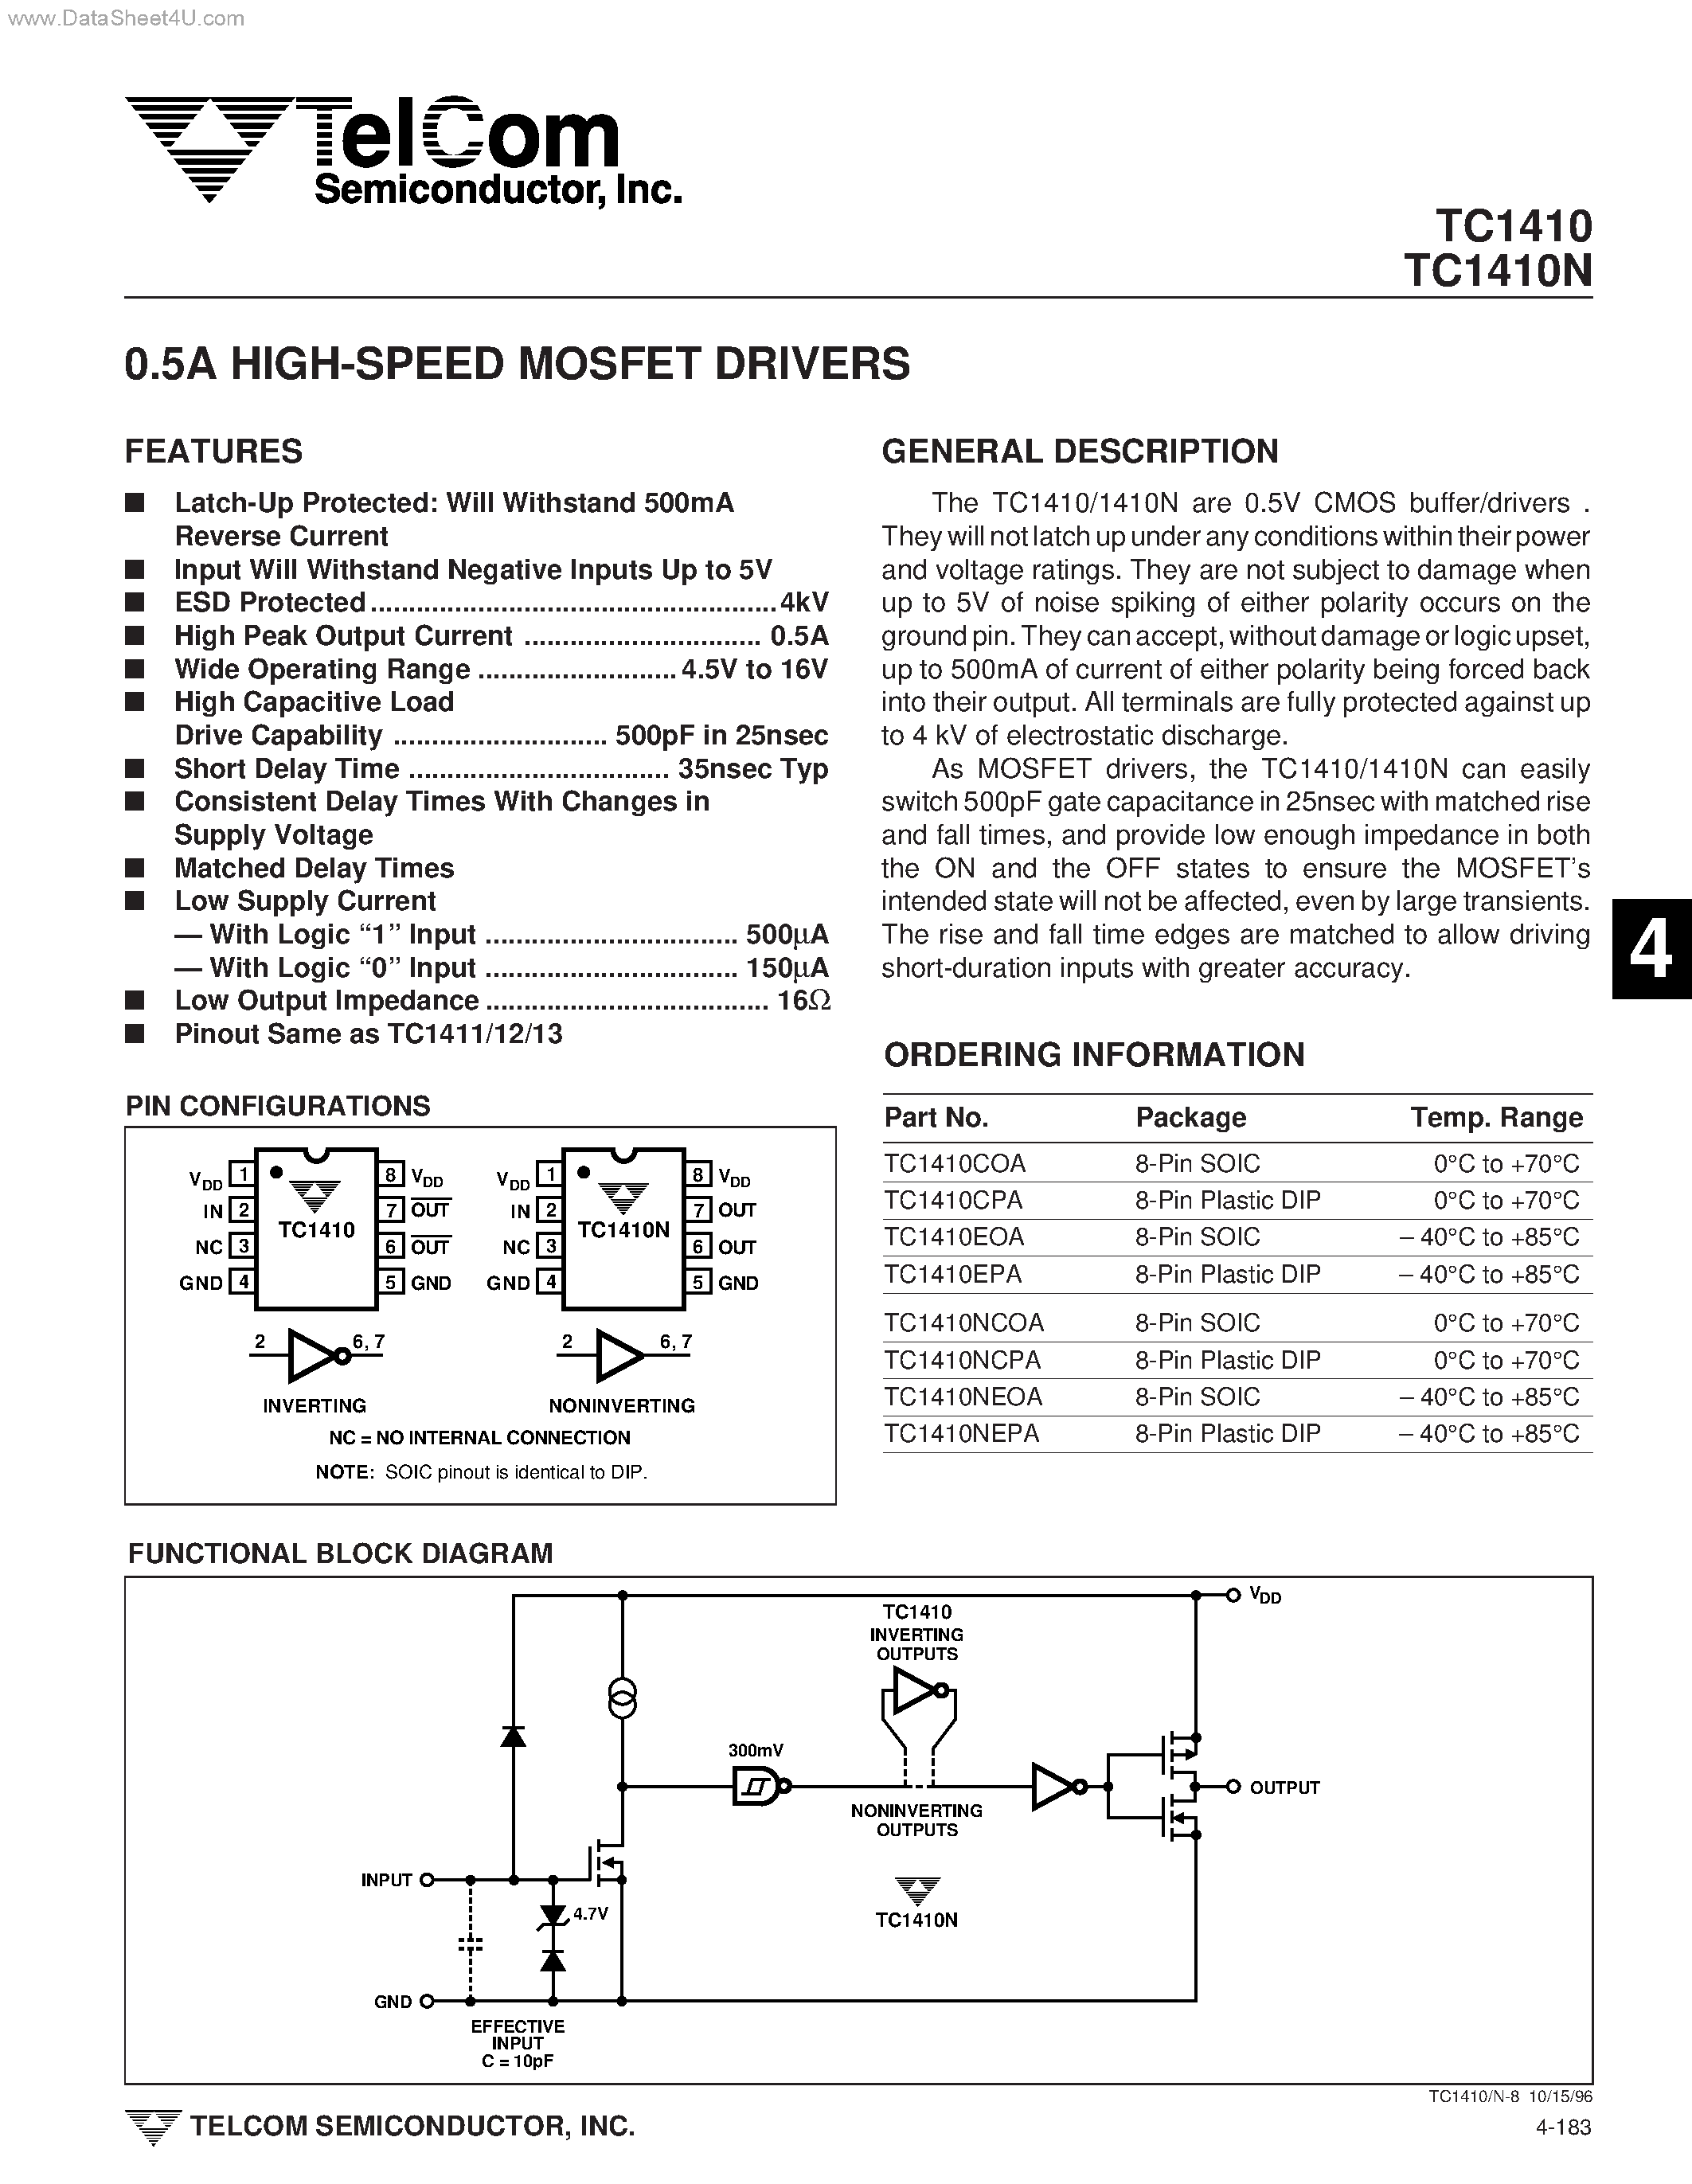 Datasheet TC1410 - HIGH-SPEED MOSFET DRIVERS page 1